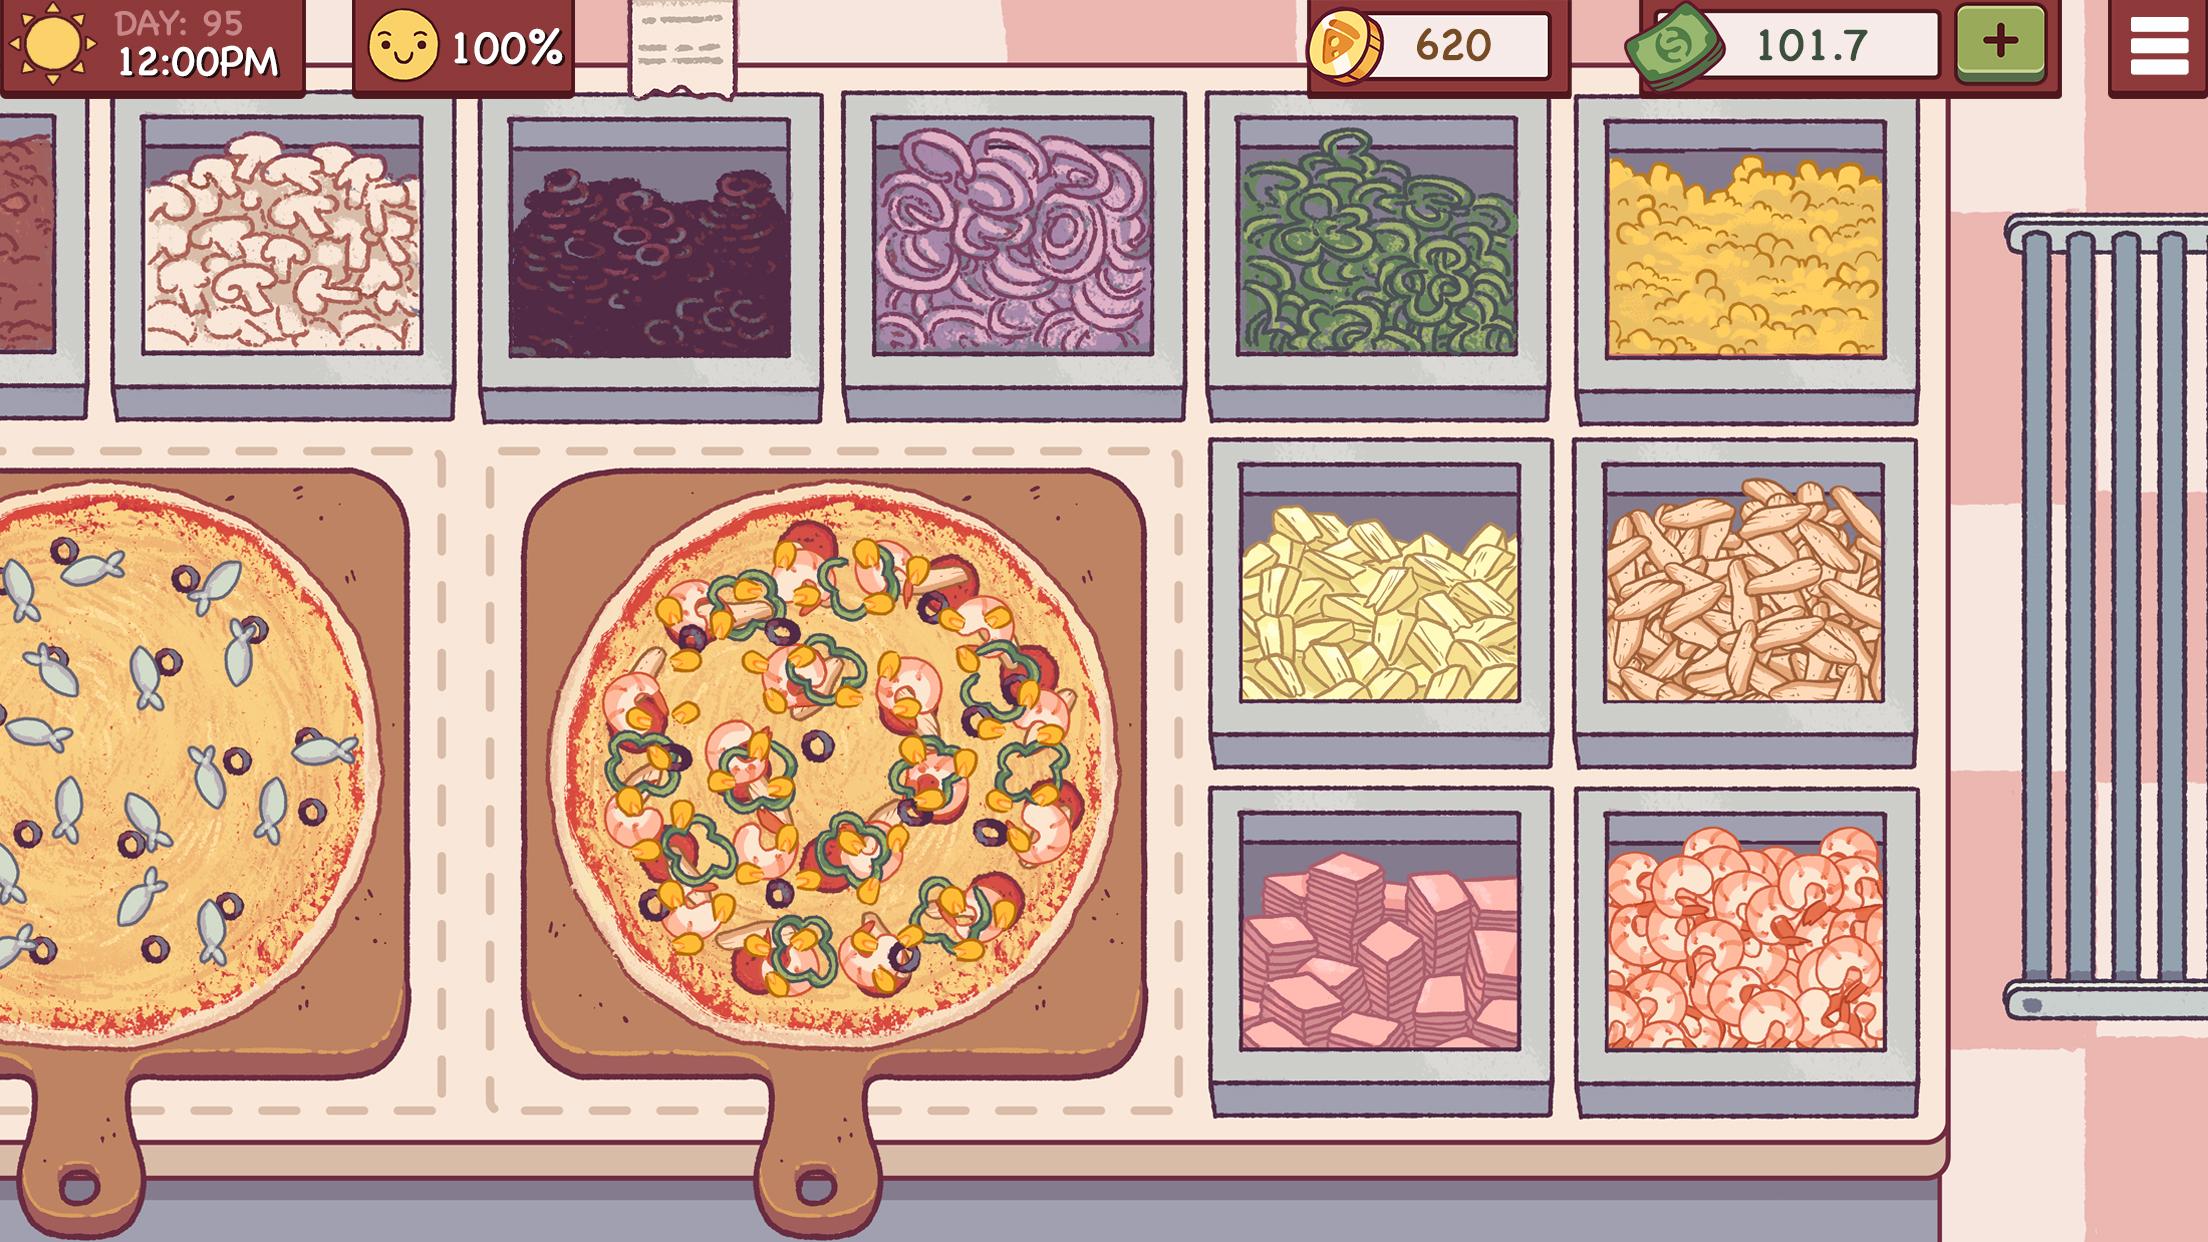 Image from Good Pizza, Great Pizza